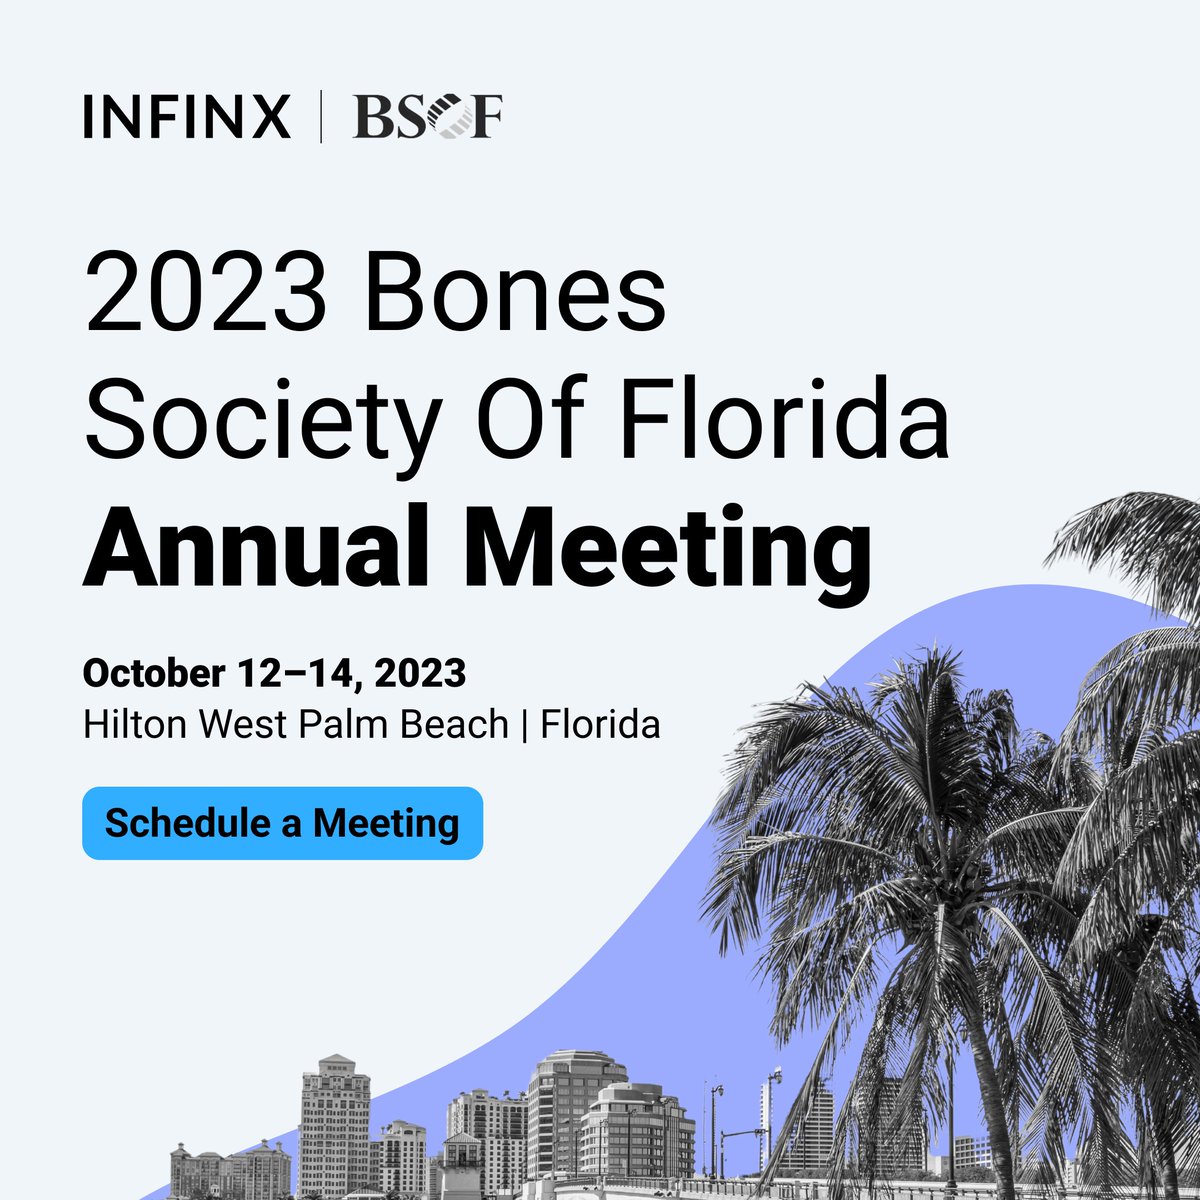 We’re looking forward to @FLBonesSociety Annual Meeting this Thursday. 

Stop by table #10 to learn how we can help optimize patient access and rev cycle workflows with our AI-powered solutions.  
hubs.li/Q024ScDg0

#OrthopedicCoding #OrthopedicBilling #OrthopedicRCM